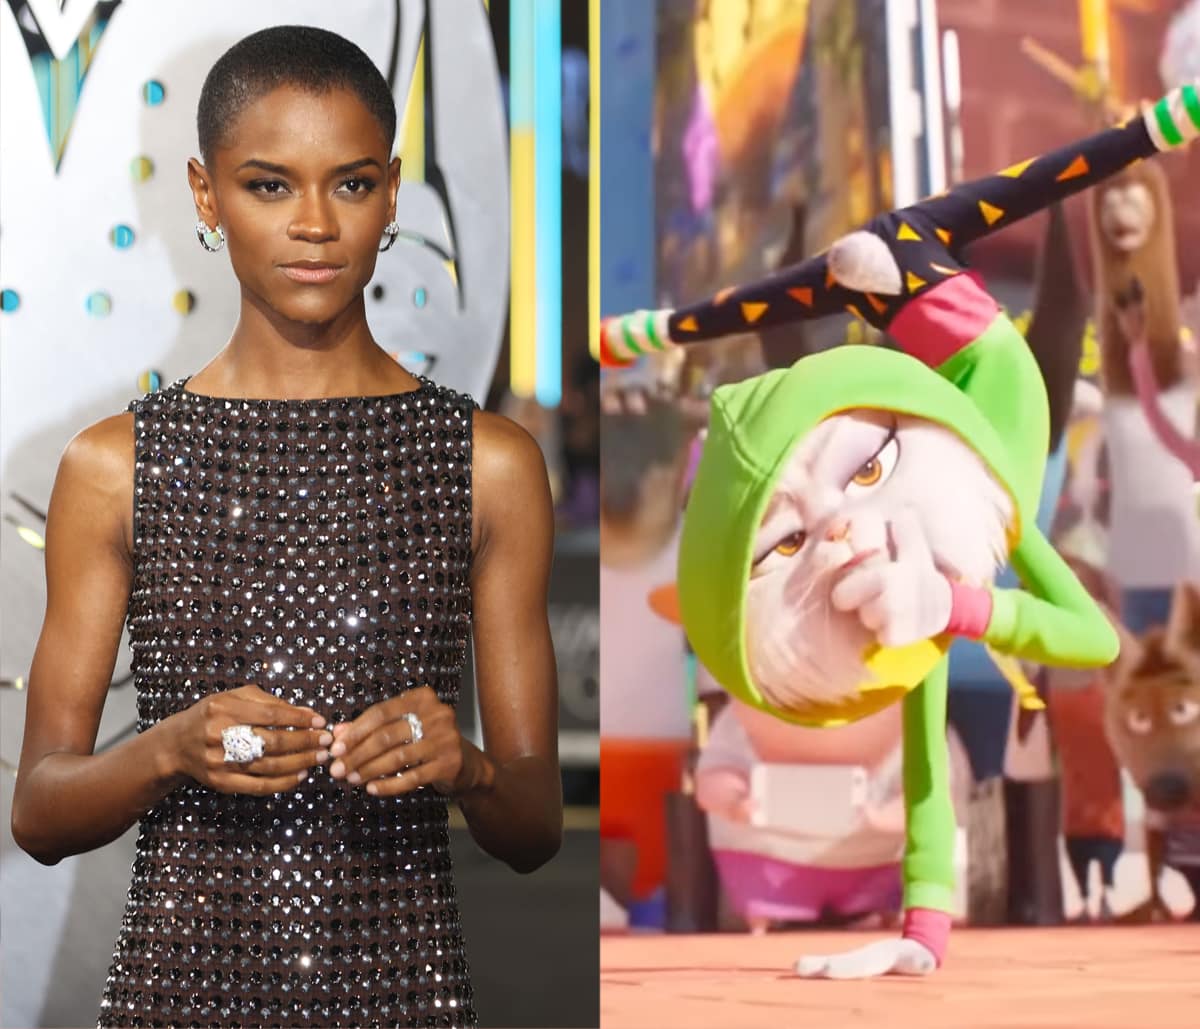 Guyanese-British actress Letitia Wright voices Nooshy, a lanky, free-spirited dancer in Sing 2